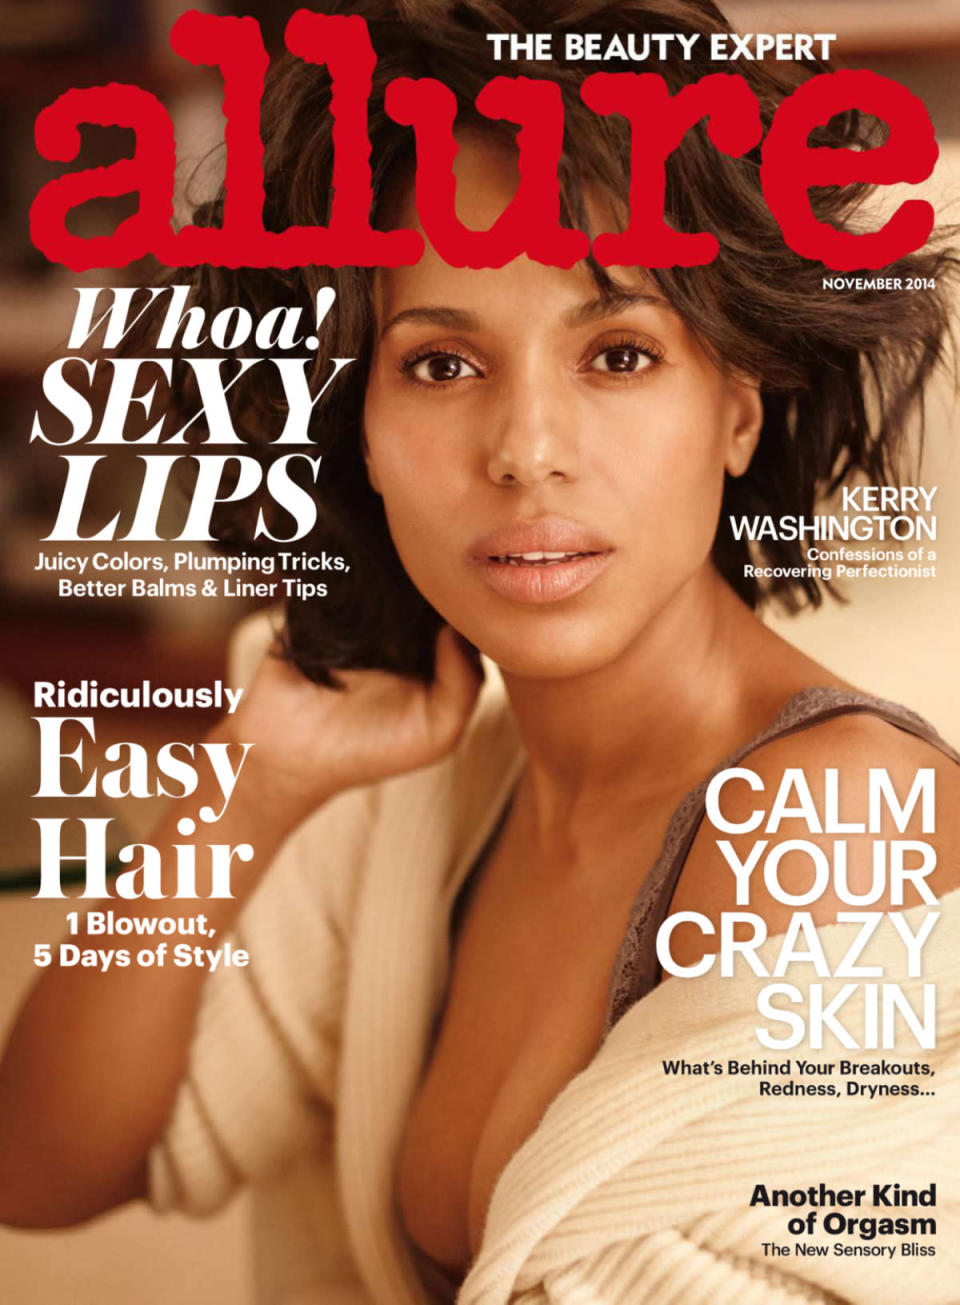 Kerry Washington on the November 2014 cover of Allure